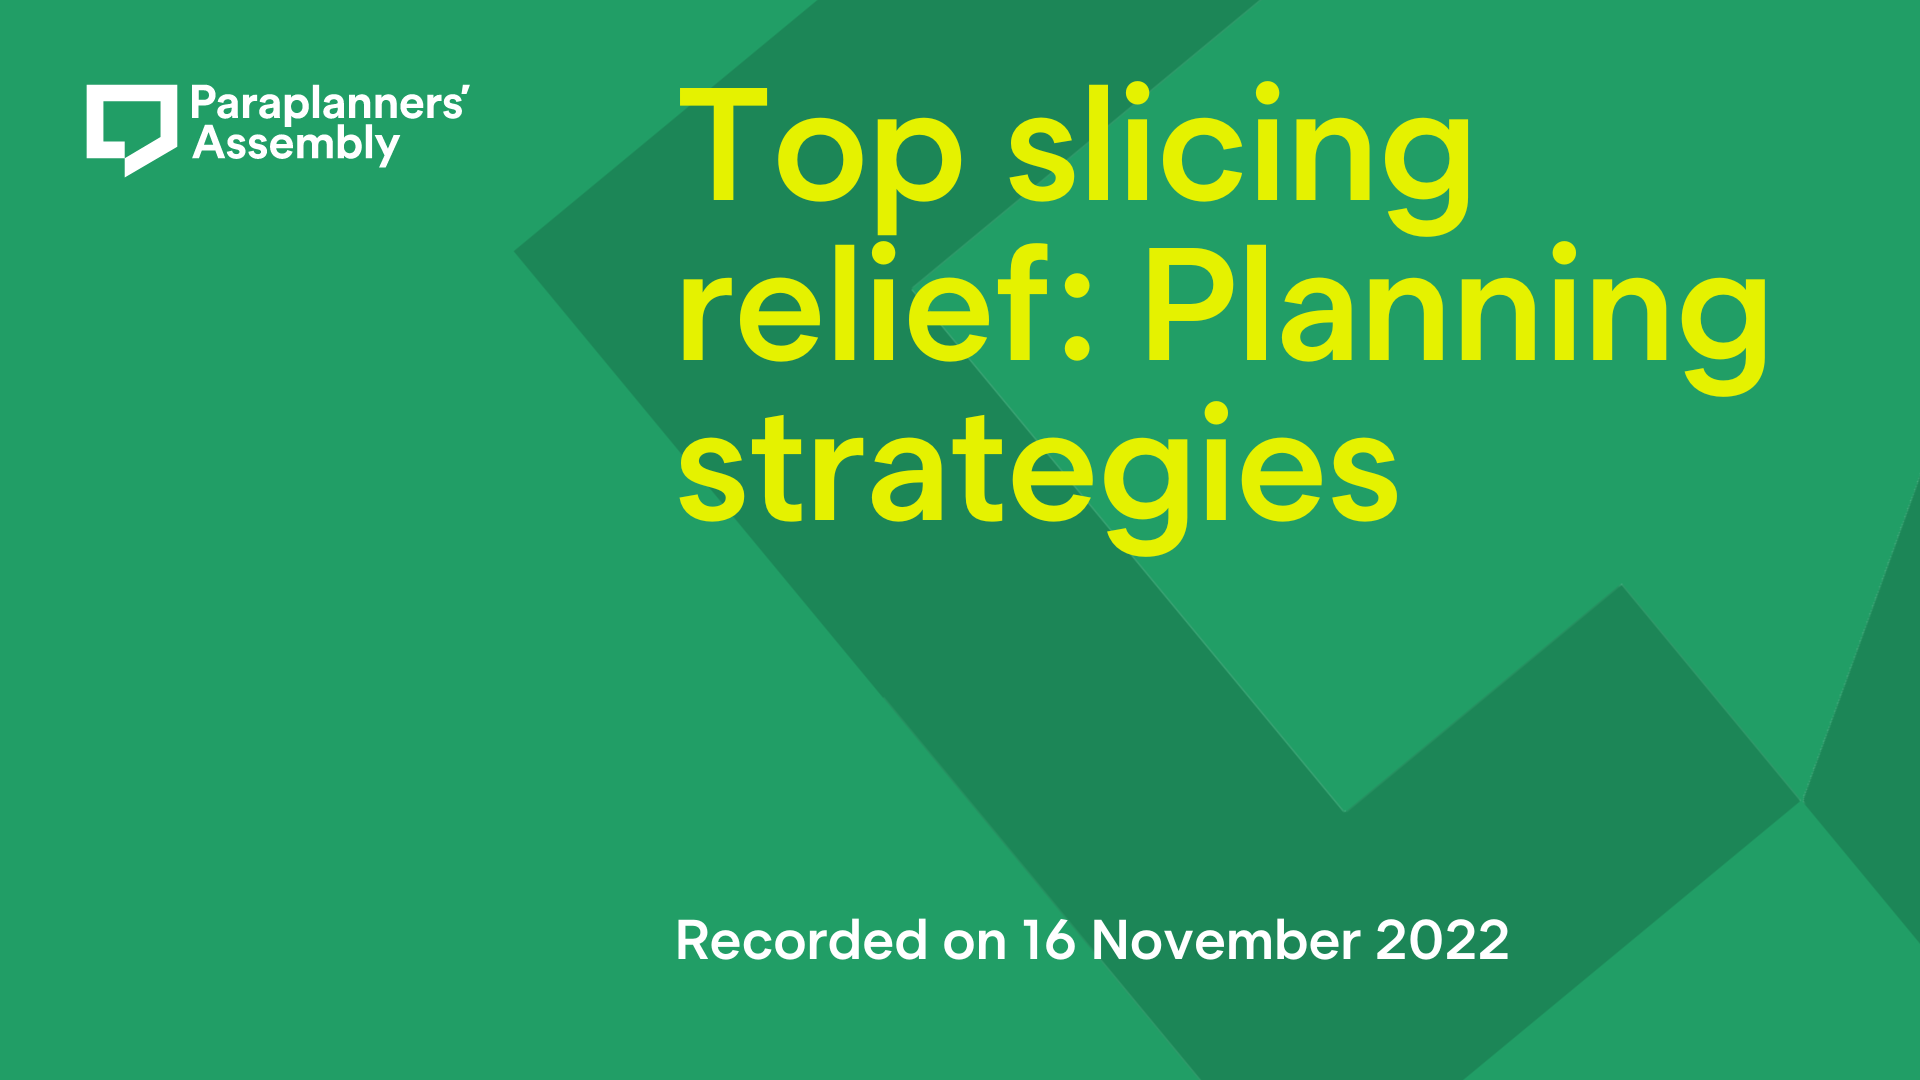 Top slicing relief: Planning strategies. Recorded on 16 November 2022.